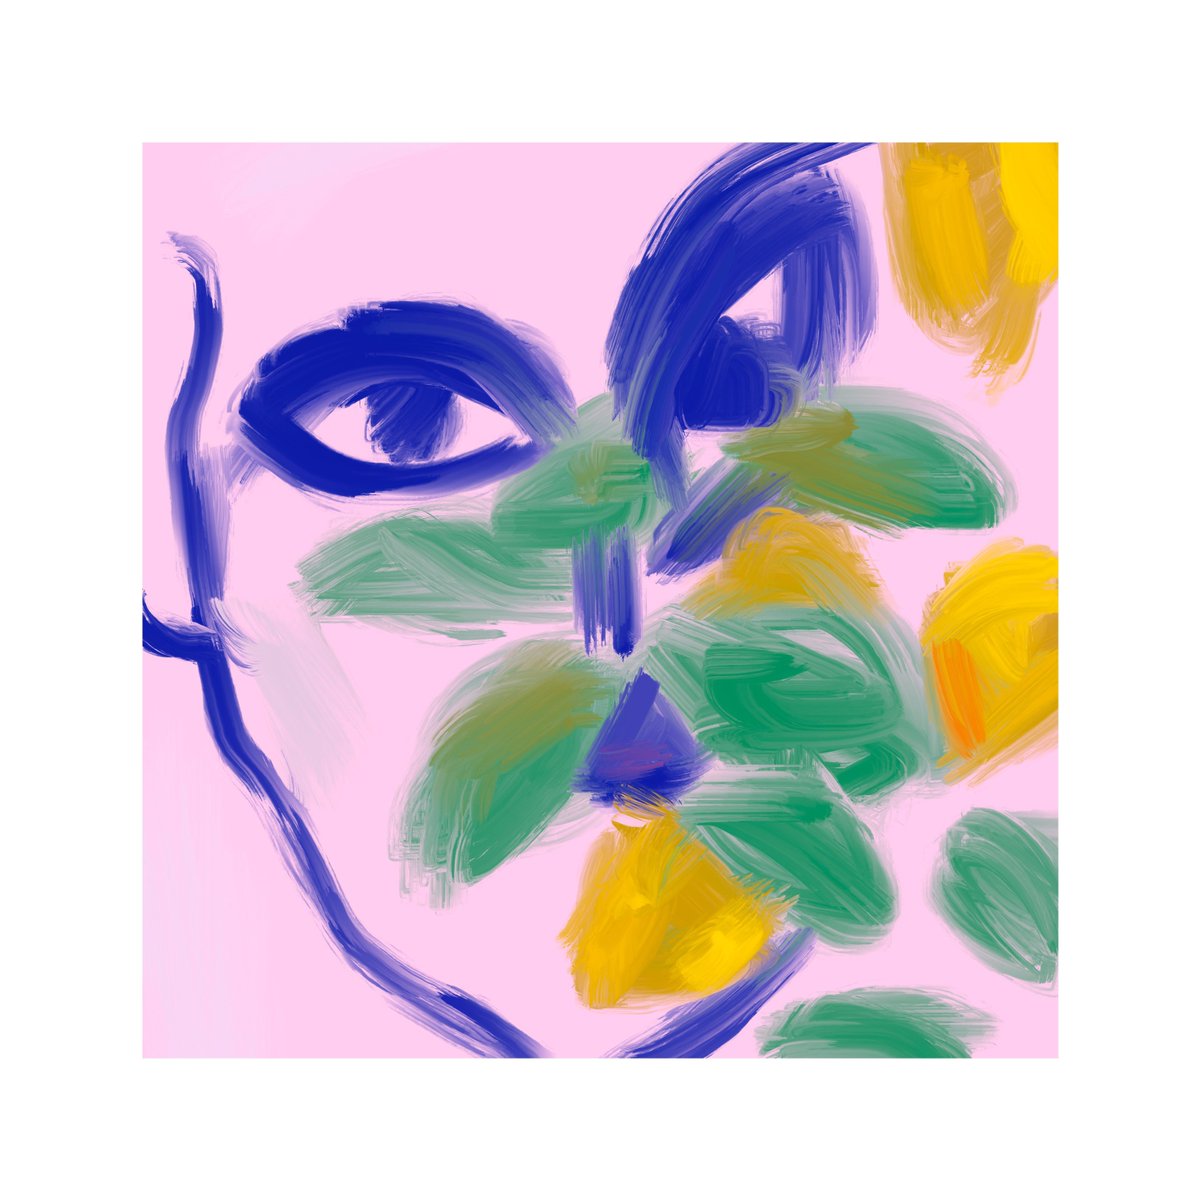 “two-for-one lemon tree”
apr 24, ‘24
painted on an iPhone

#queerart #queerartist #canadianart #enby #enbyart #canadianart #nonbinary #nonbinaryart #contemporaryart #art #artist #fineart